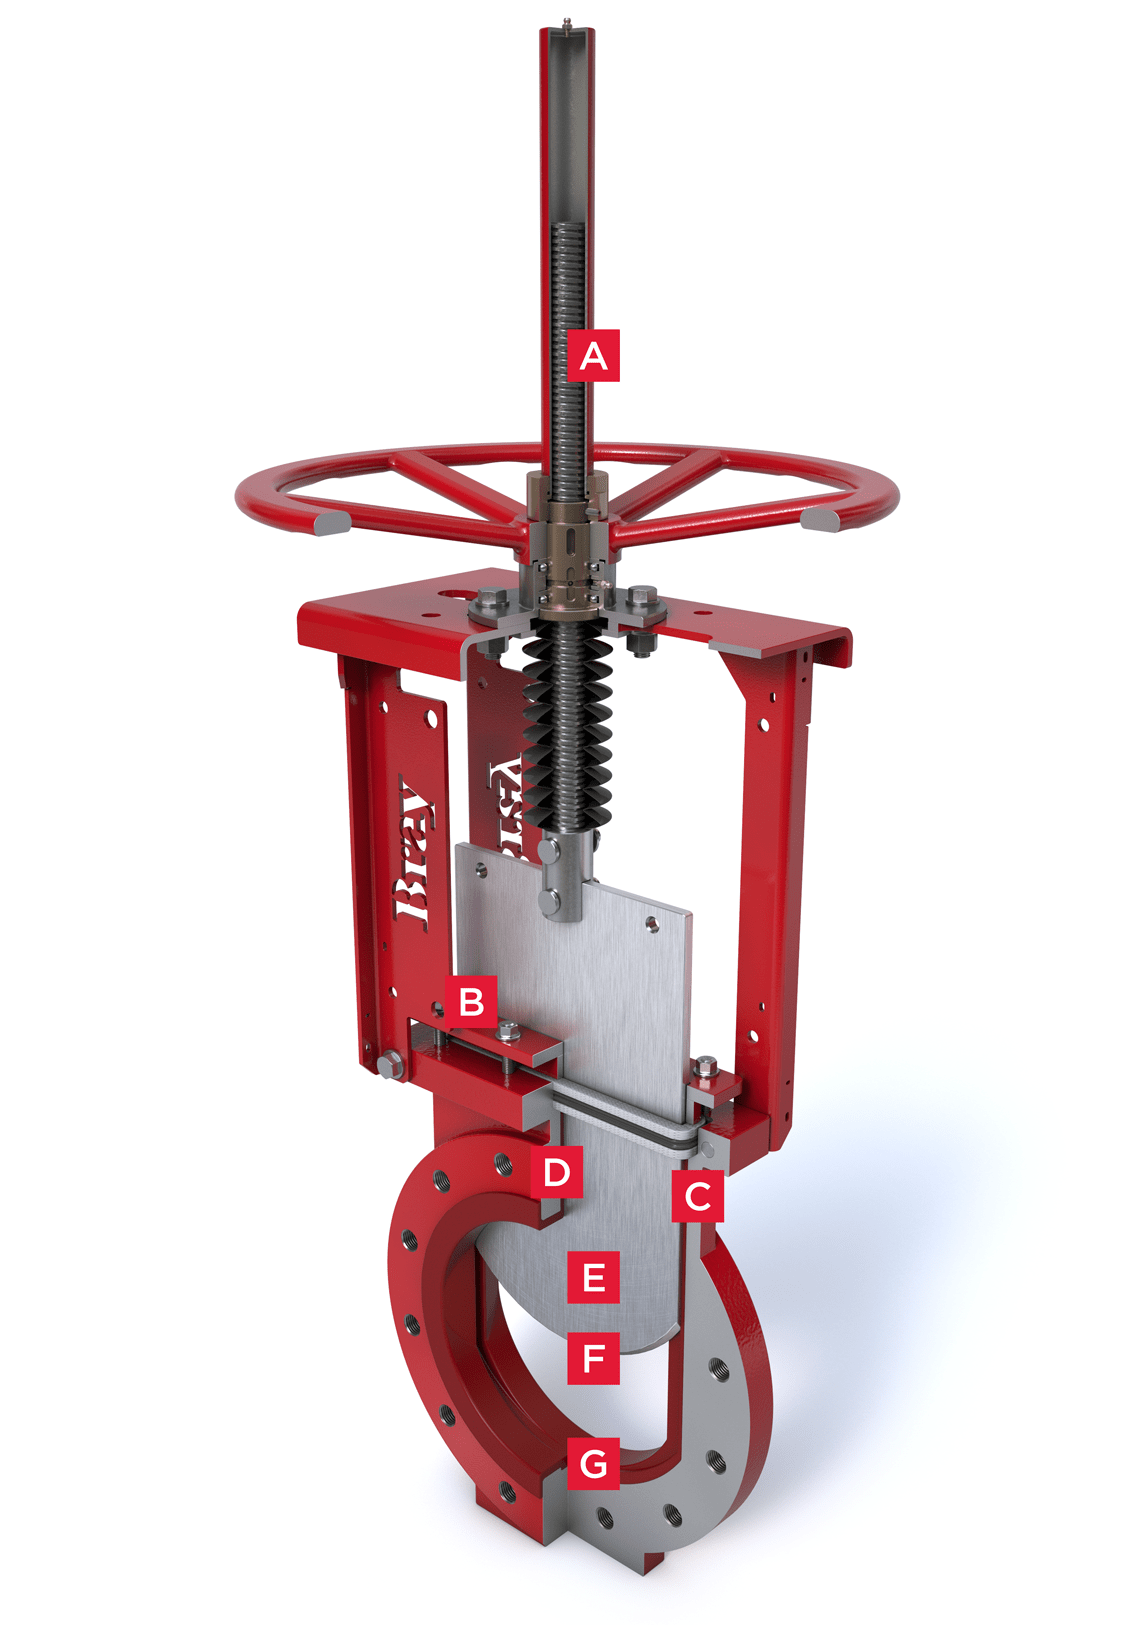 Bidirectional Knife Gate Valve Series 746 Features